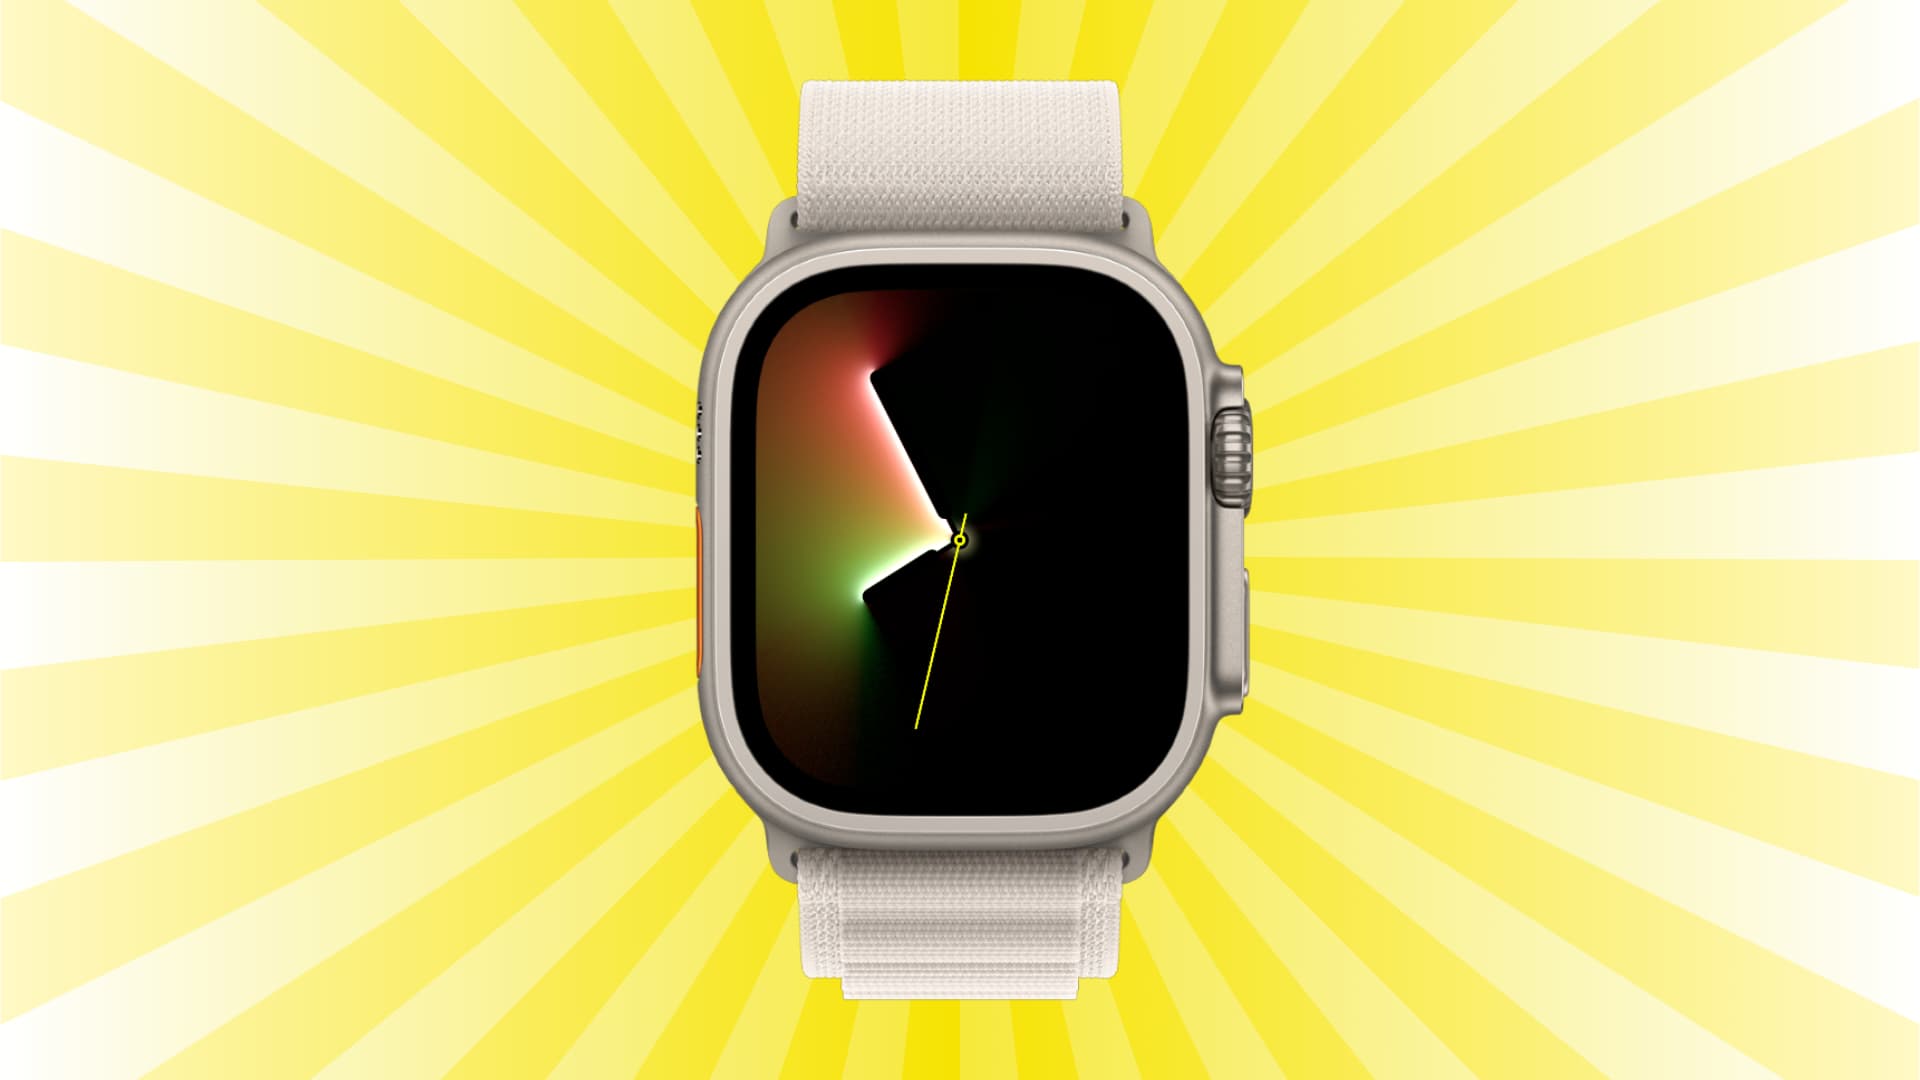 Apple Watch Ultra on a yellow background that illustrates light rays coming out of it